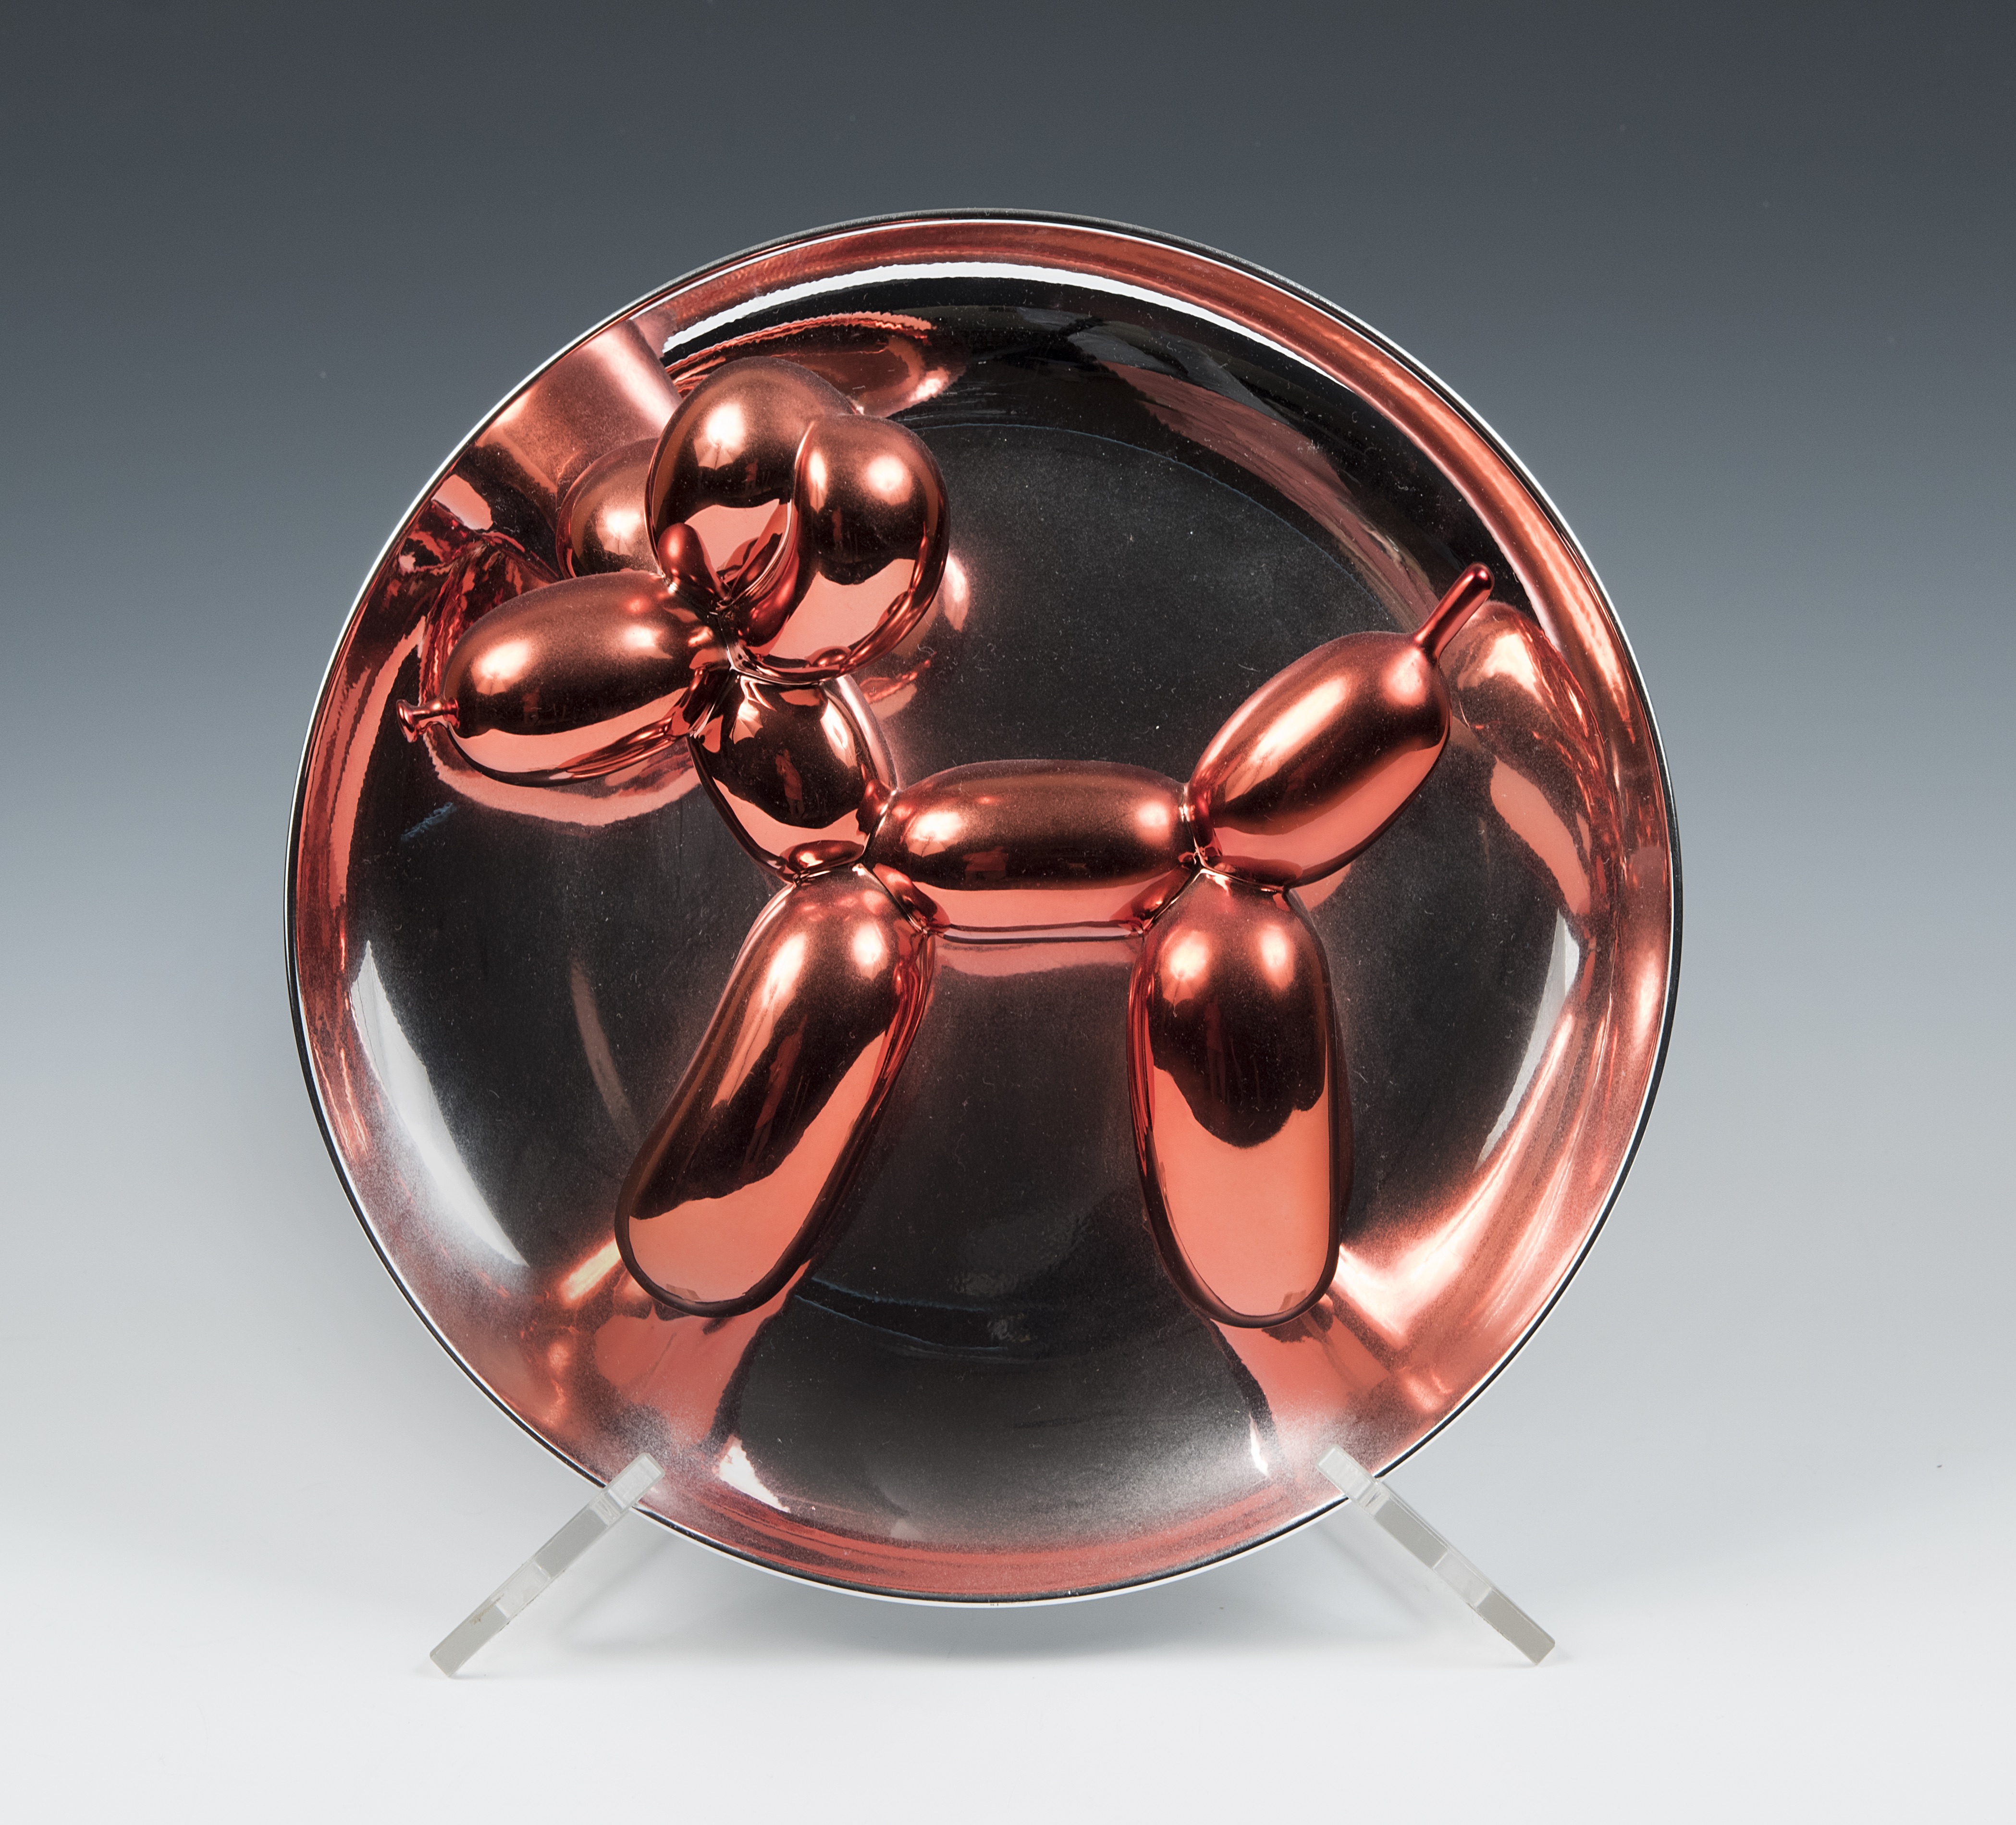 an artwork by jeff koons make to look like a dog made out of a balloon.